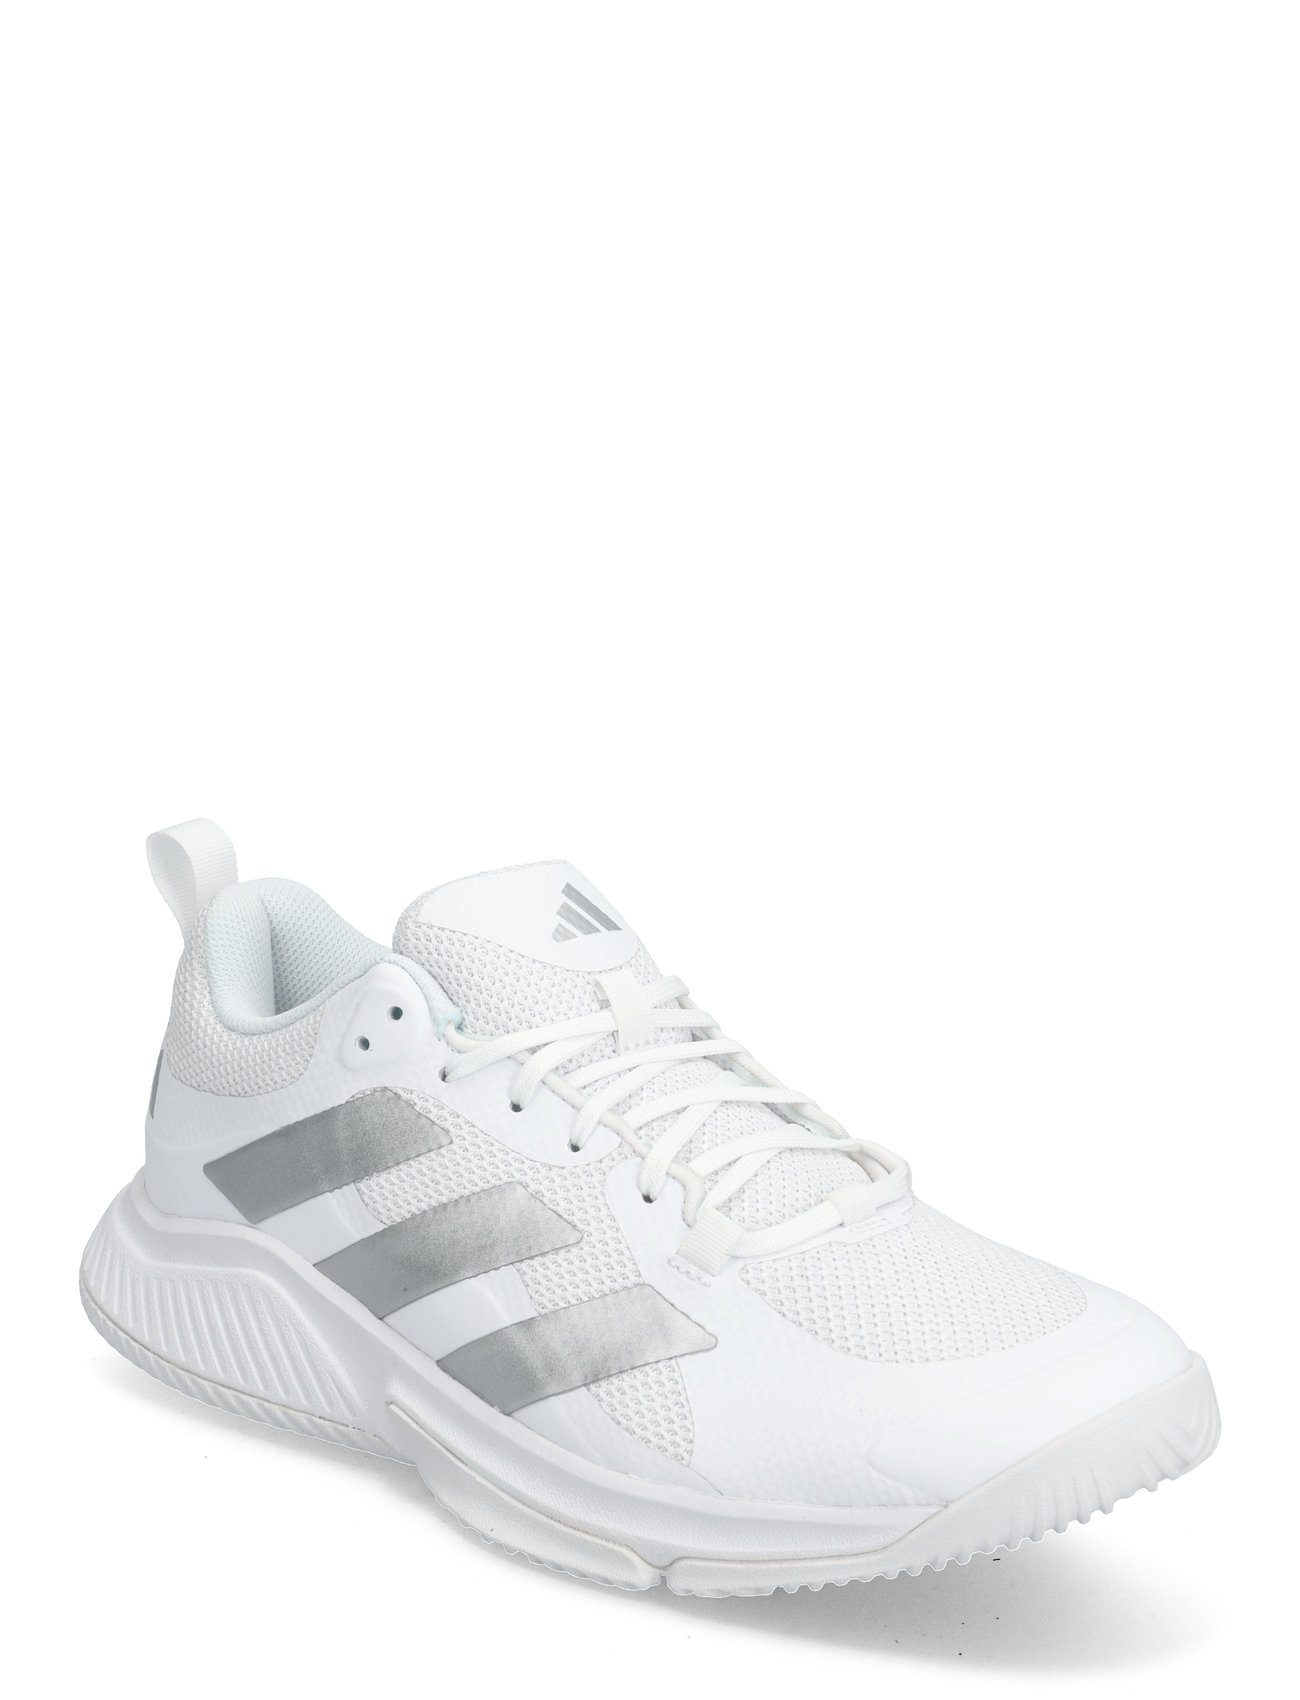 Court Team 2.0 W Sport Sport Shoes Indoor Sports Shoes White Adidas Performance